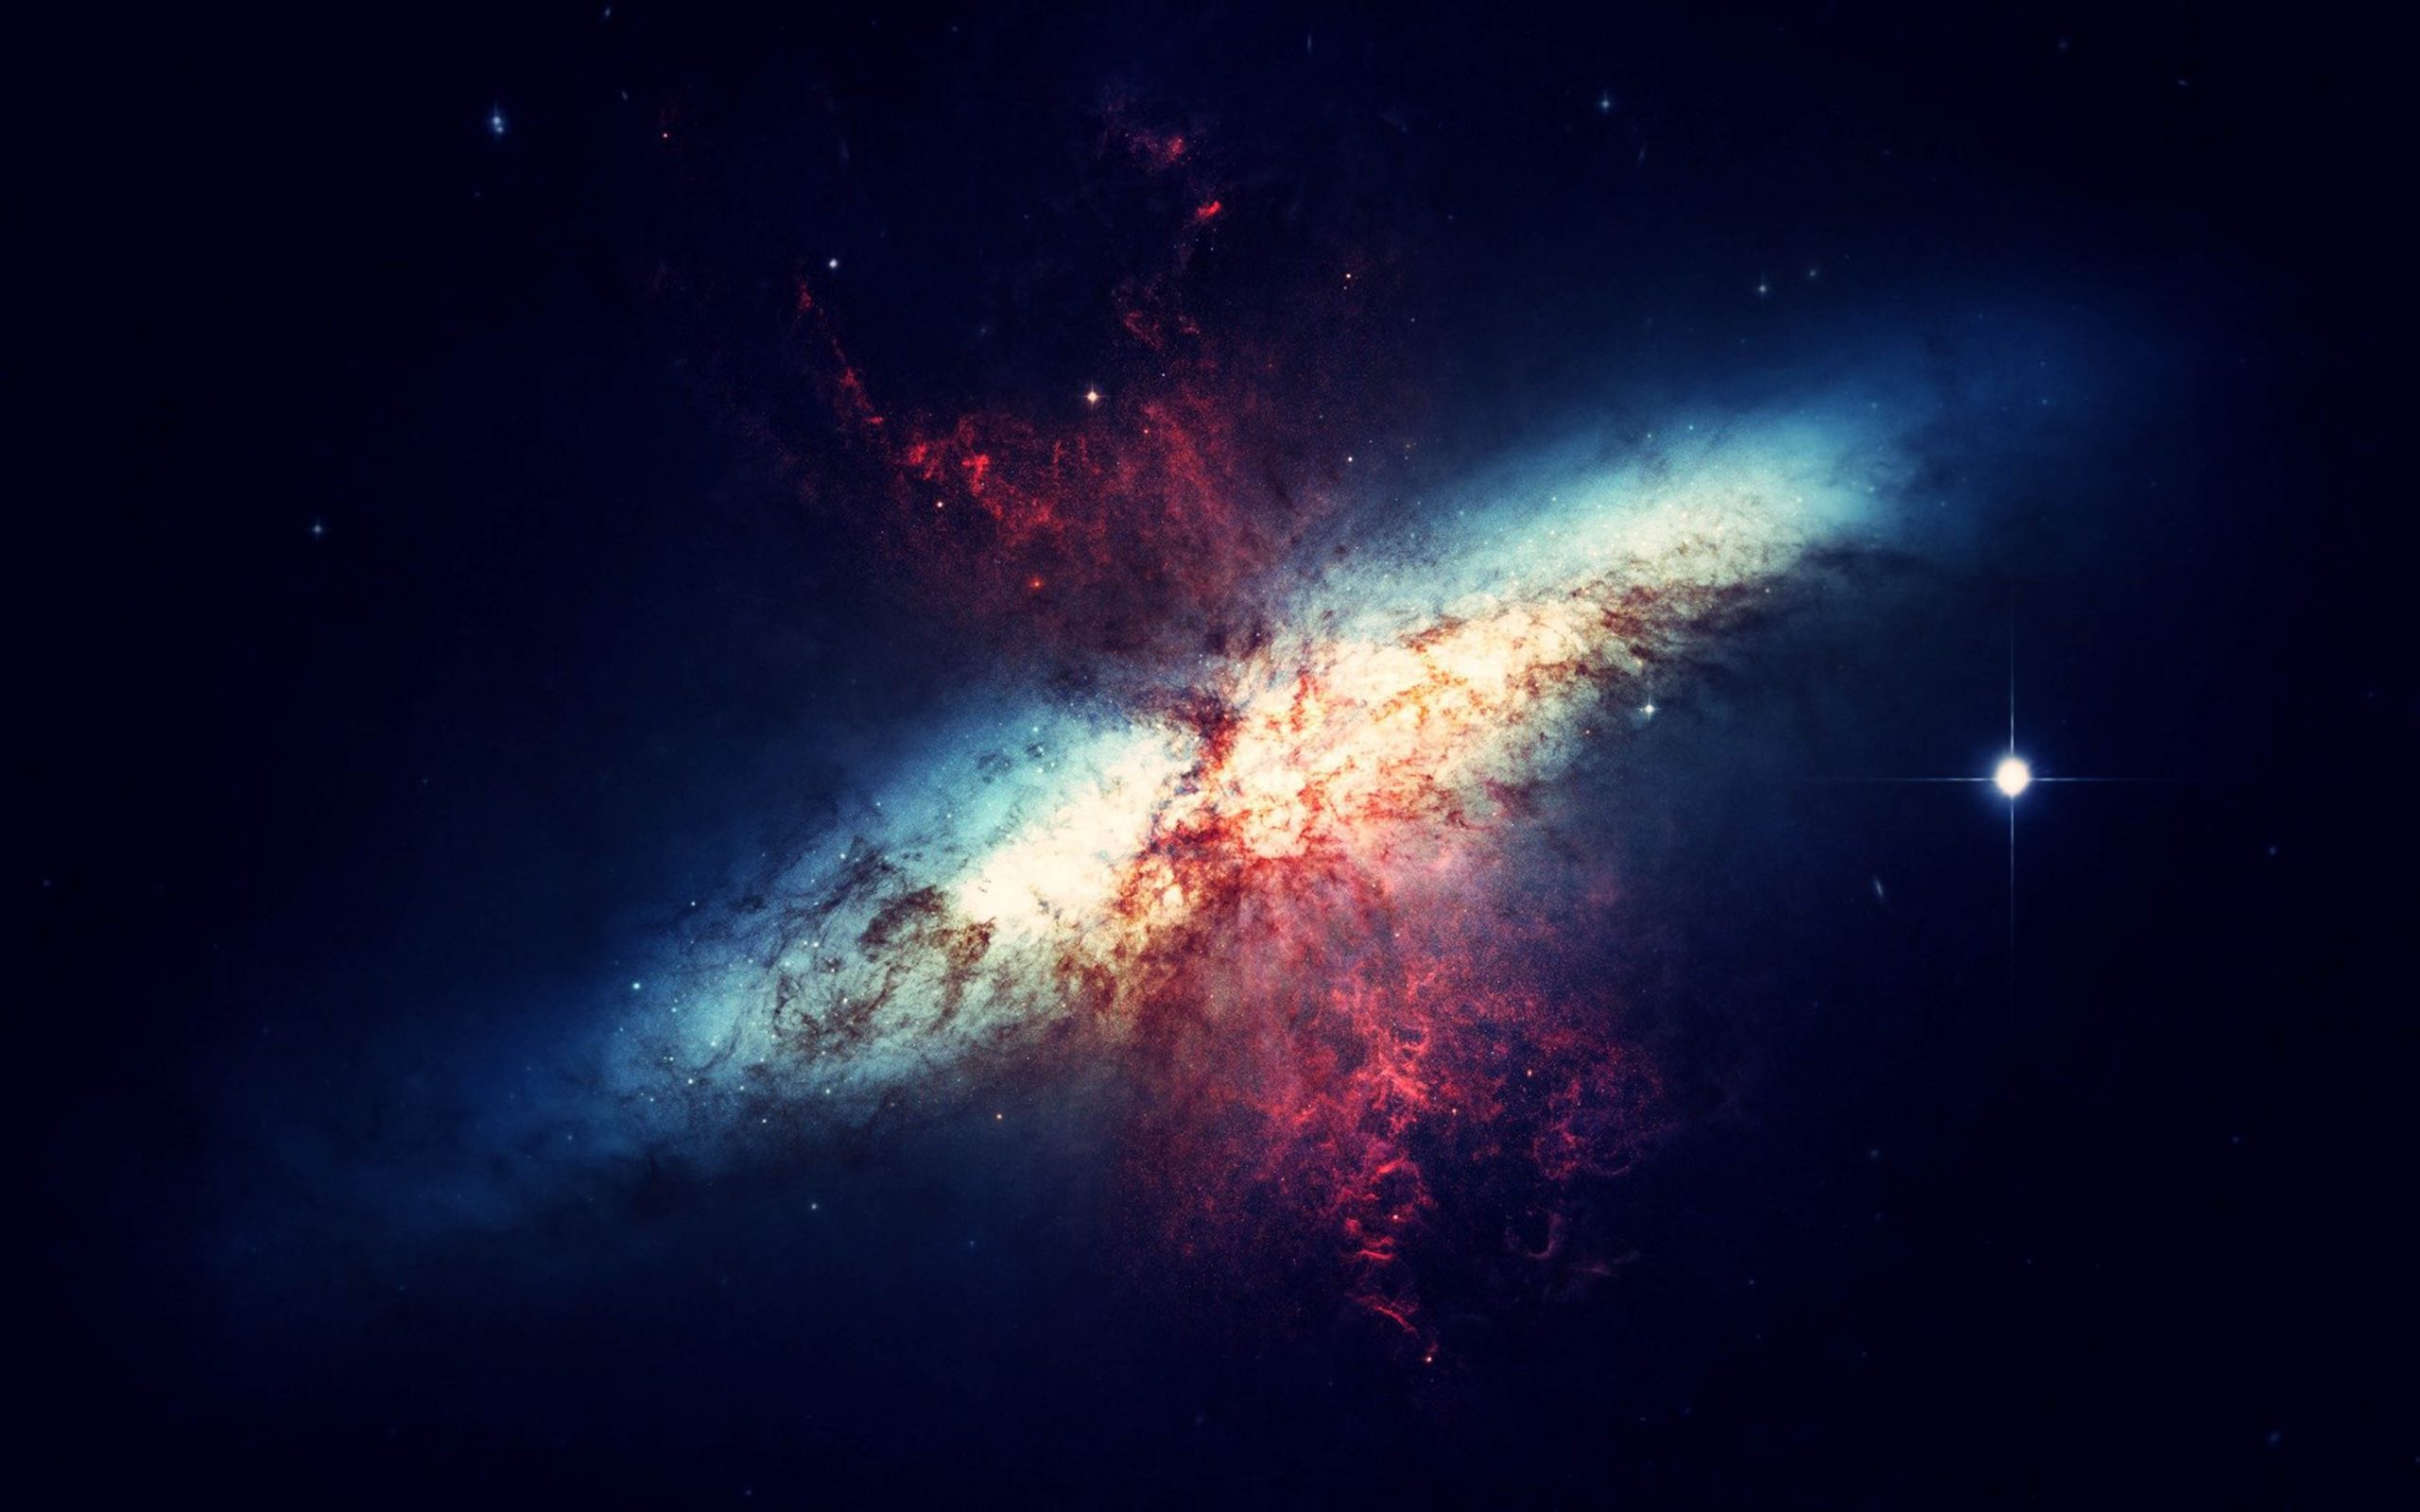 Scientists are looking for an accurate theory of the origin of the cosmos